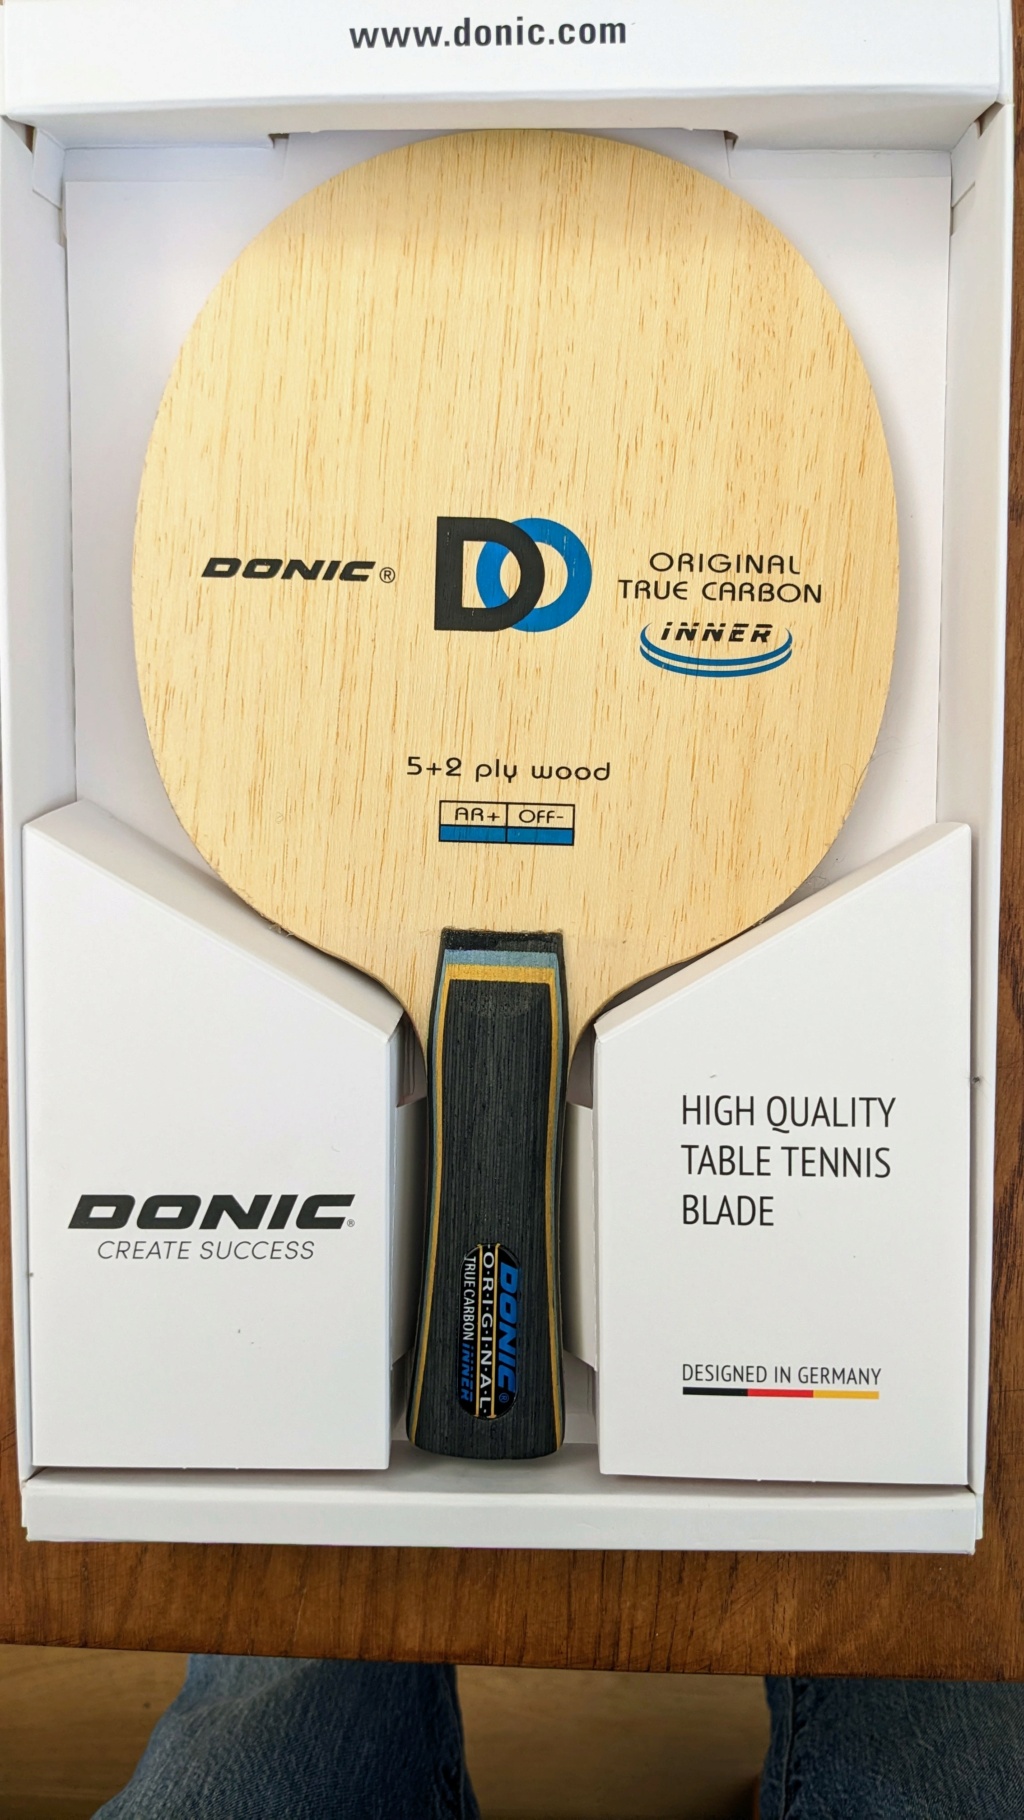 Donic Original True Carbon Inner - comme neuf Dotci_11